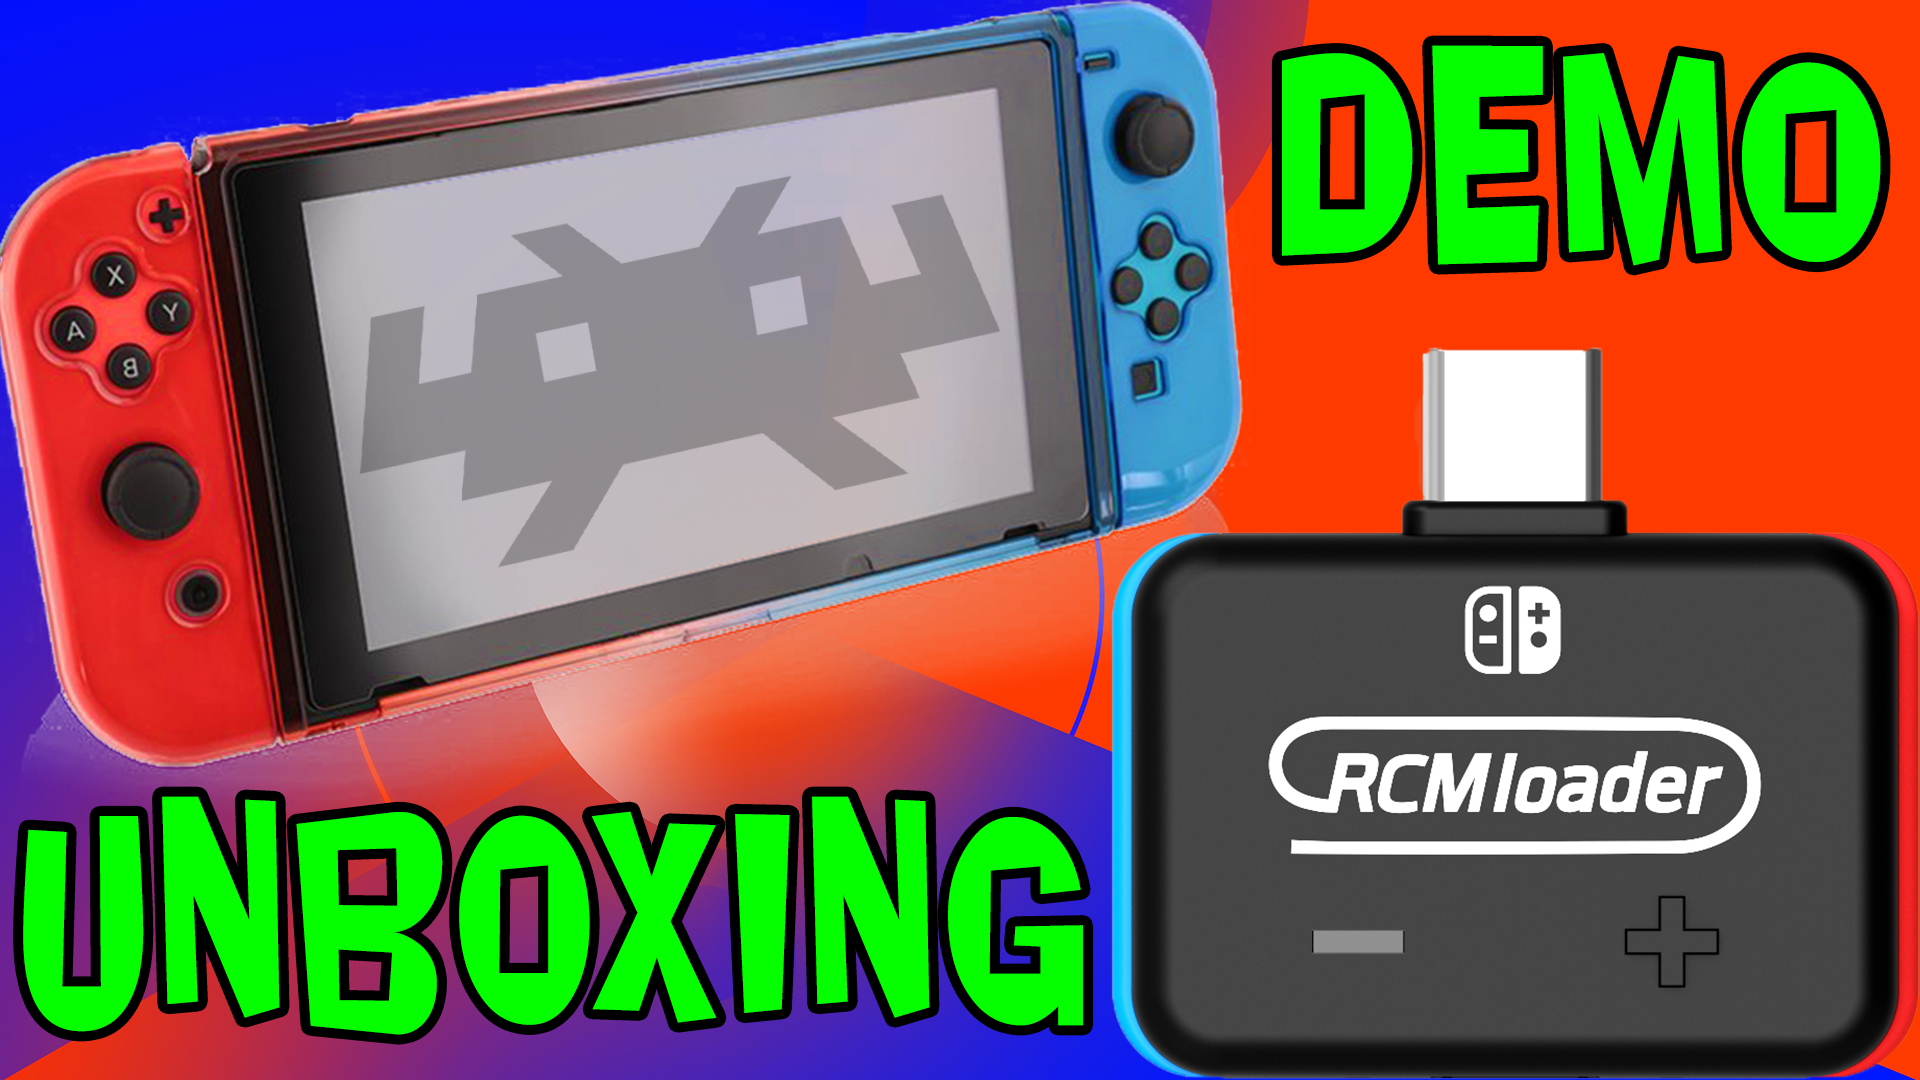 RCM Loader For Modded Nintendo Switch | Unboxing and Demo